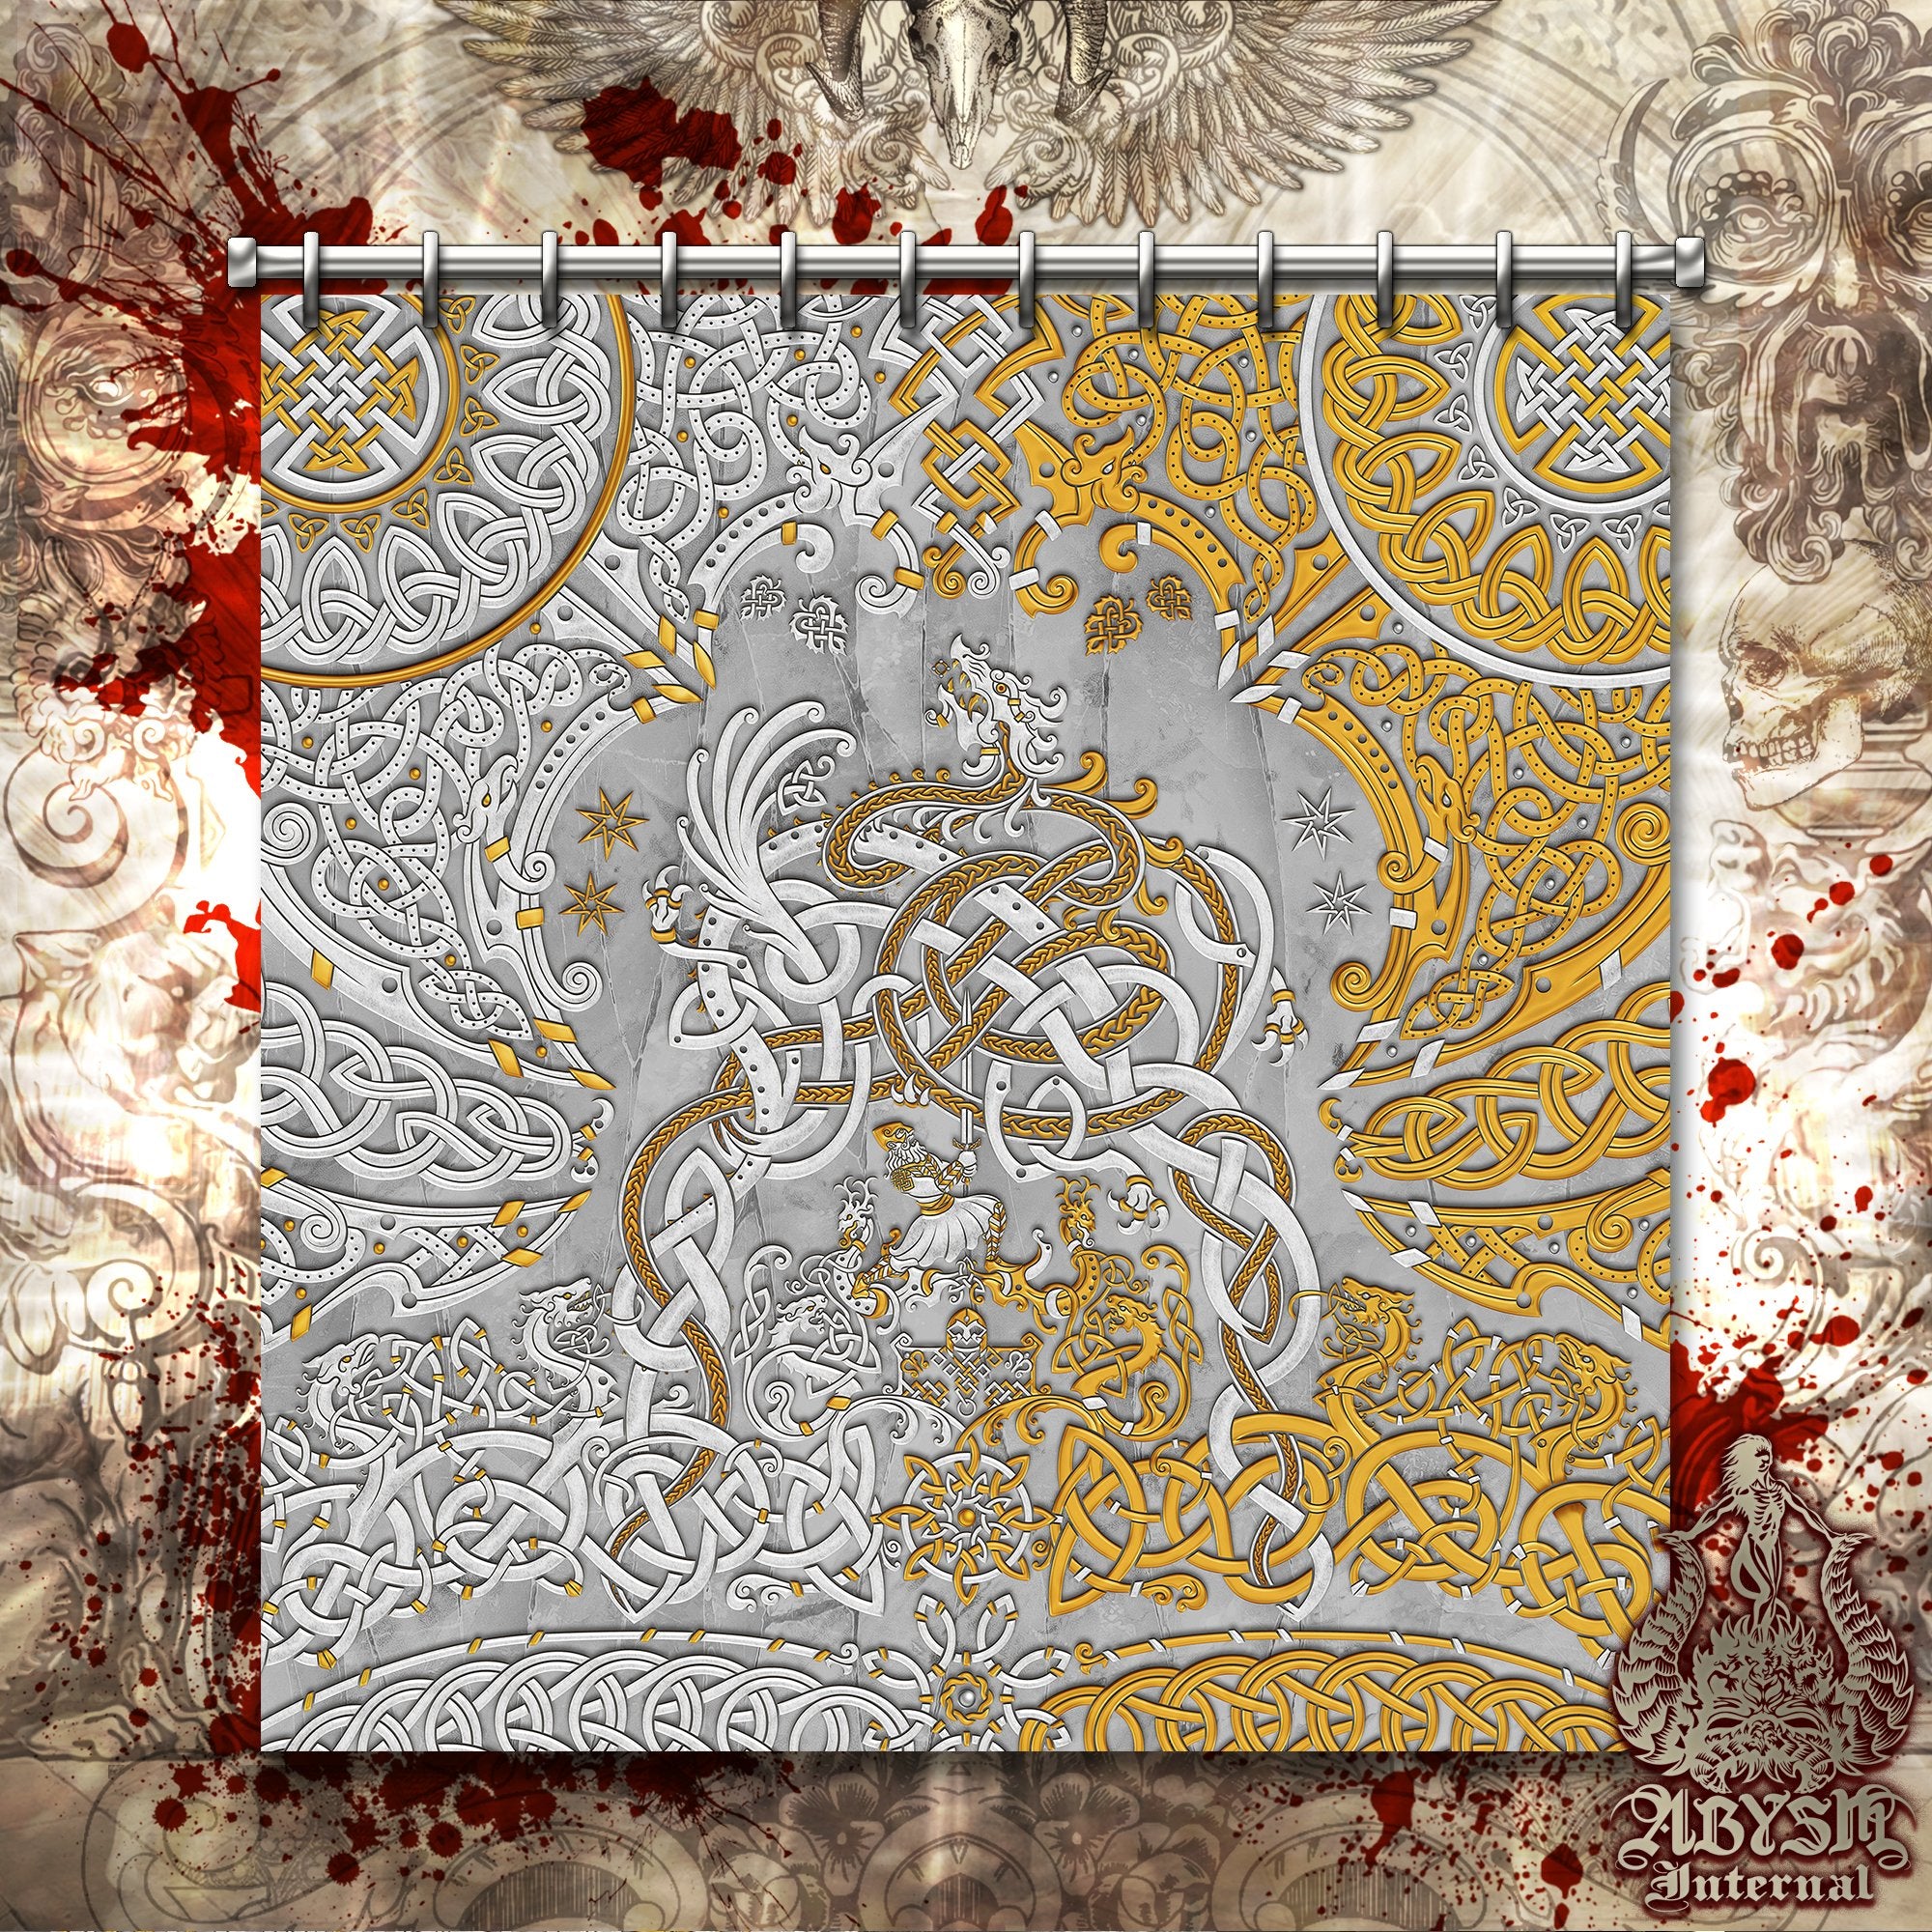 White Viking Shower Curtain, 71x74 inches, Norse Art Bathroom Decor, Nordic Dragon Fafnir - Stone and Gold, 2 Colors - Abysm Internal